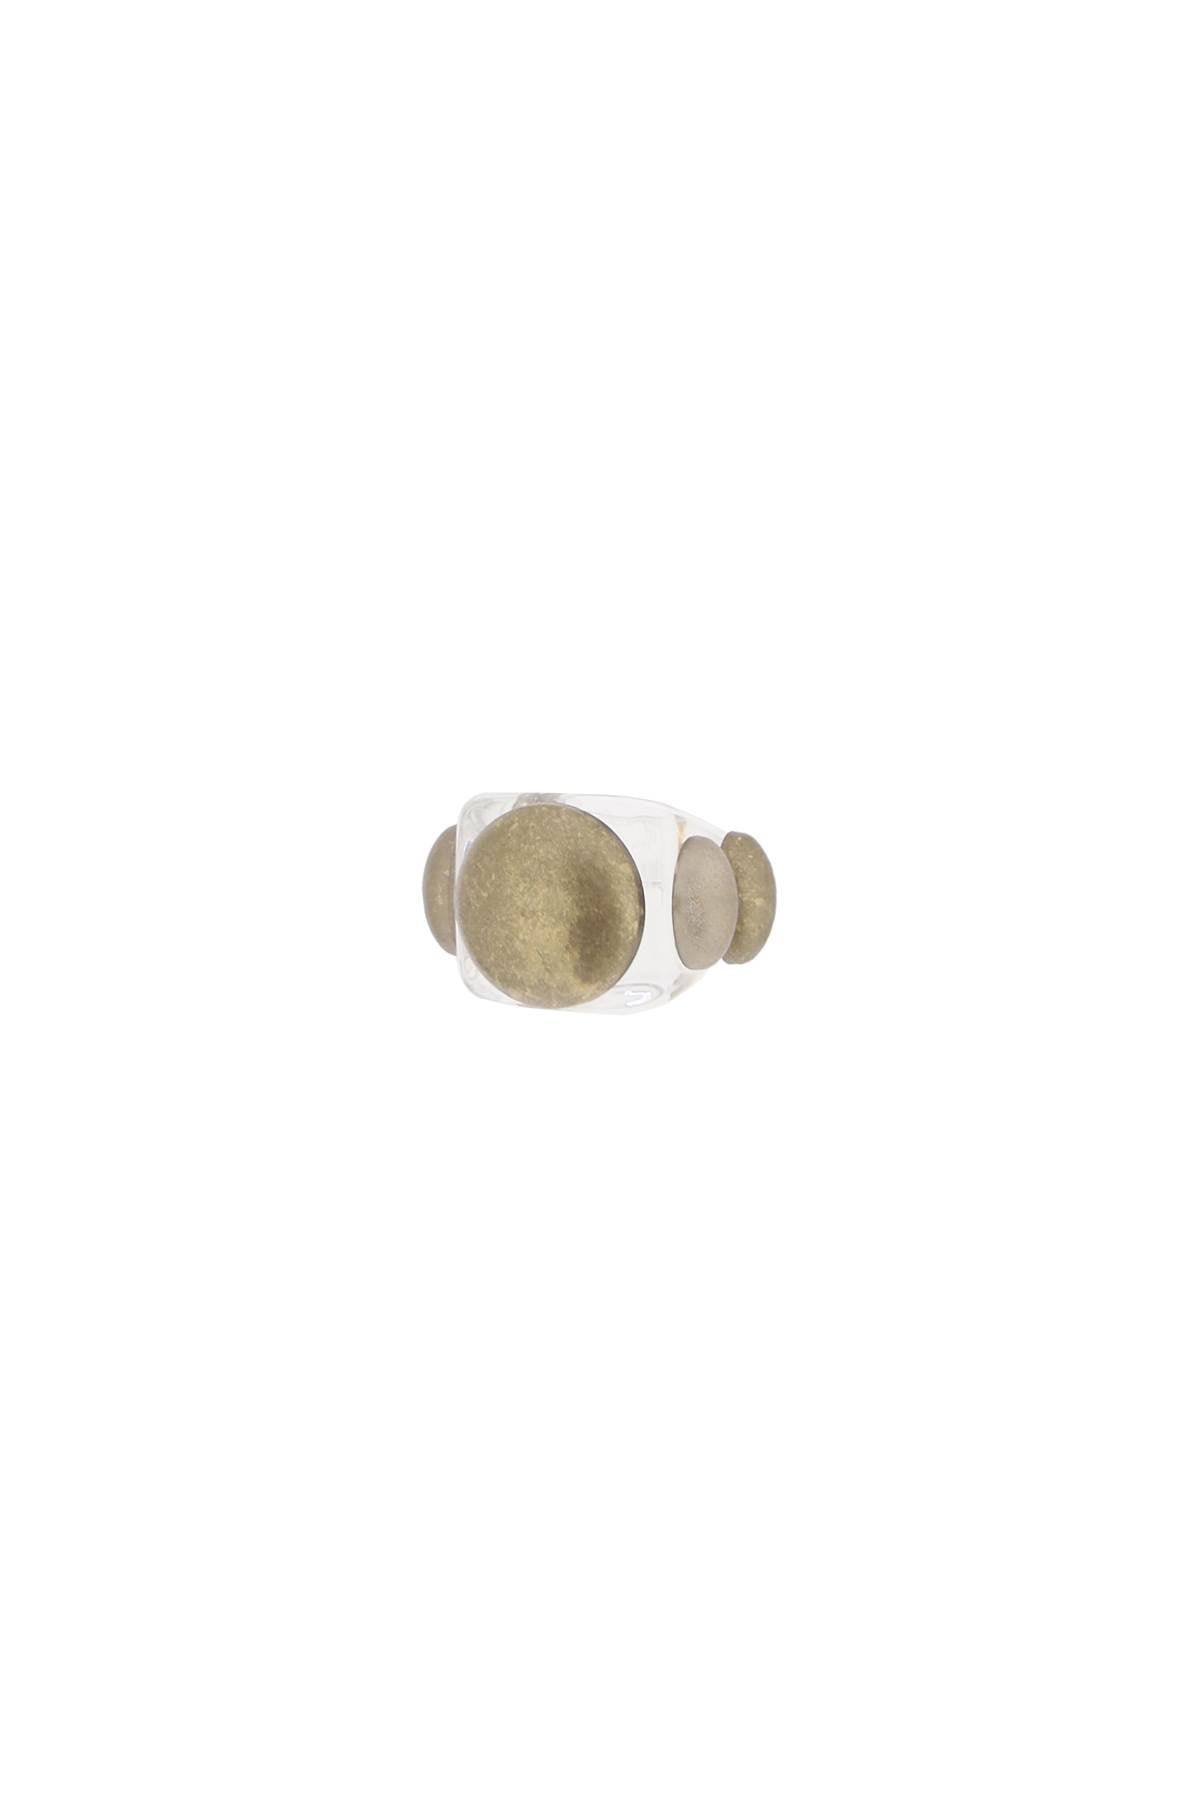 La manso crystal aged gold ring-0